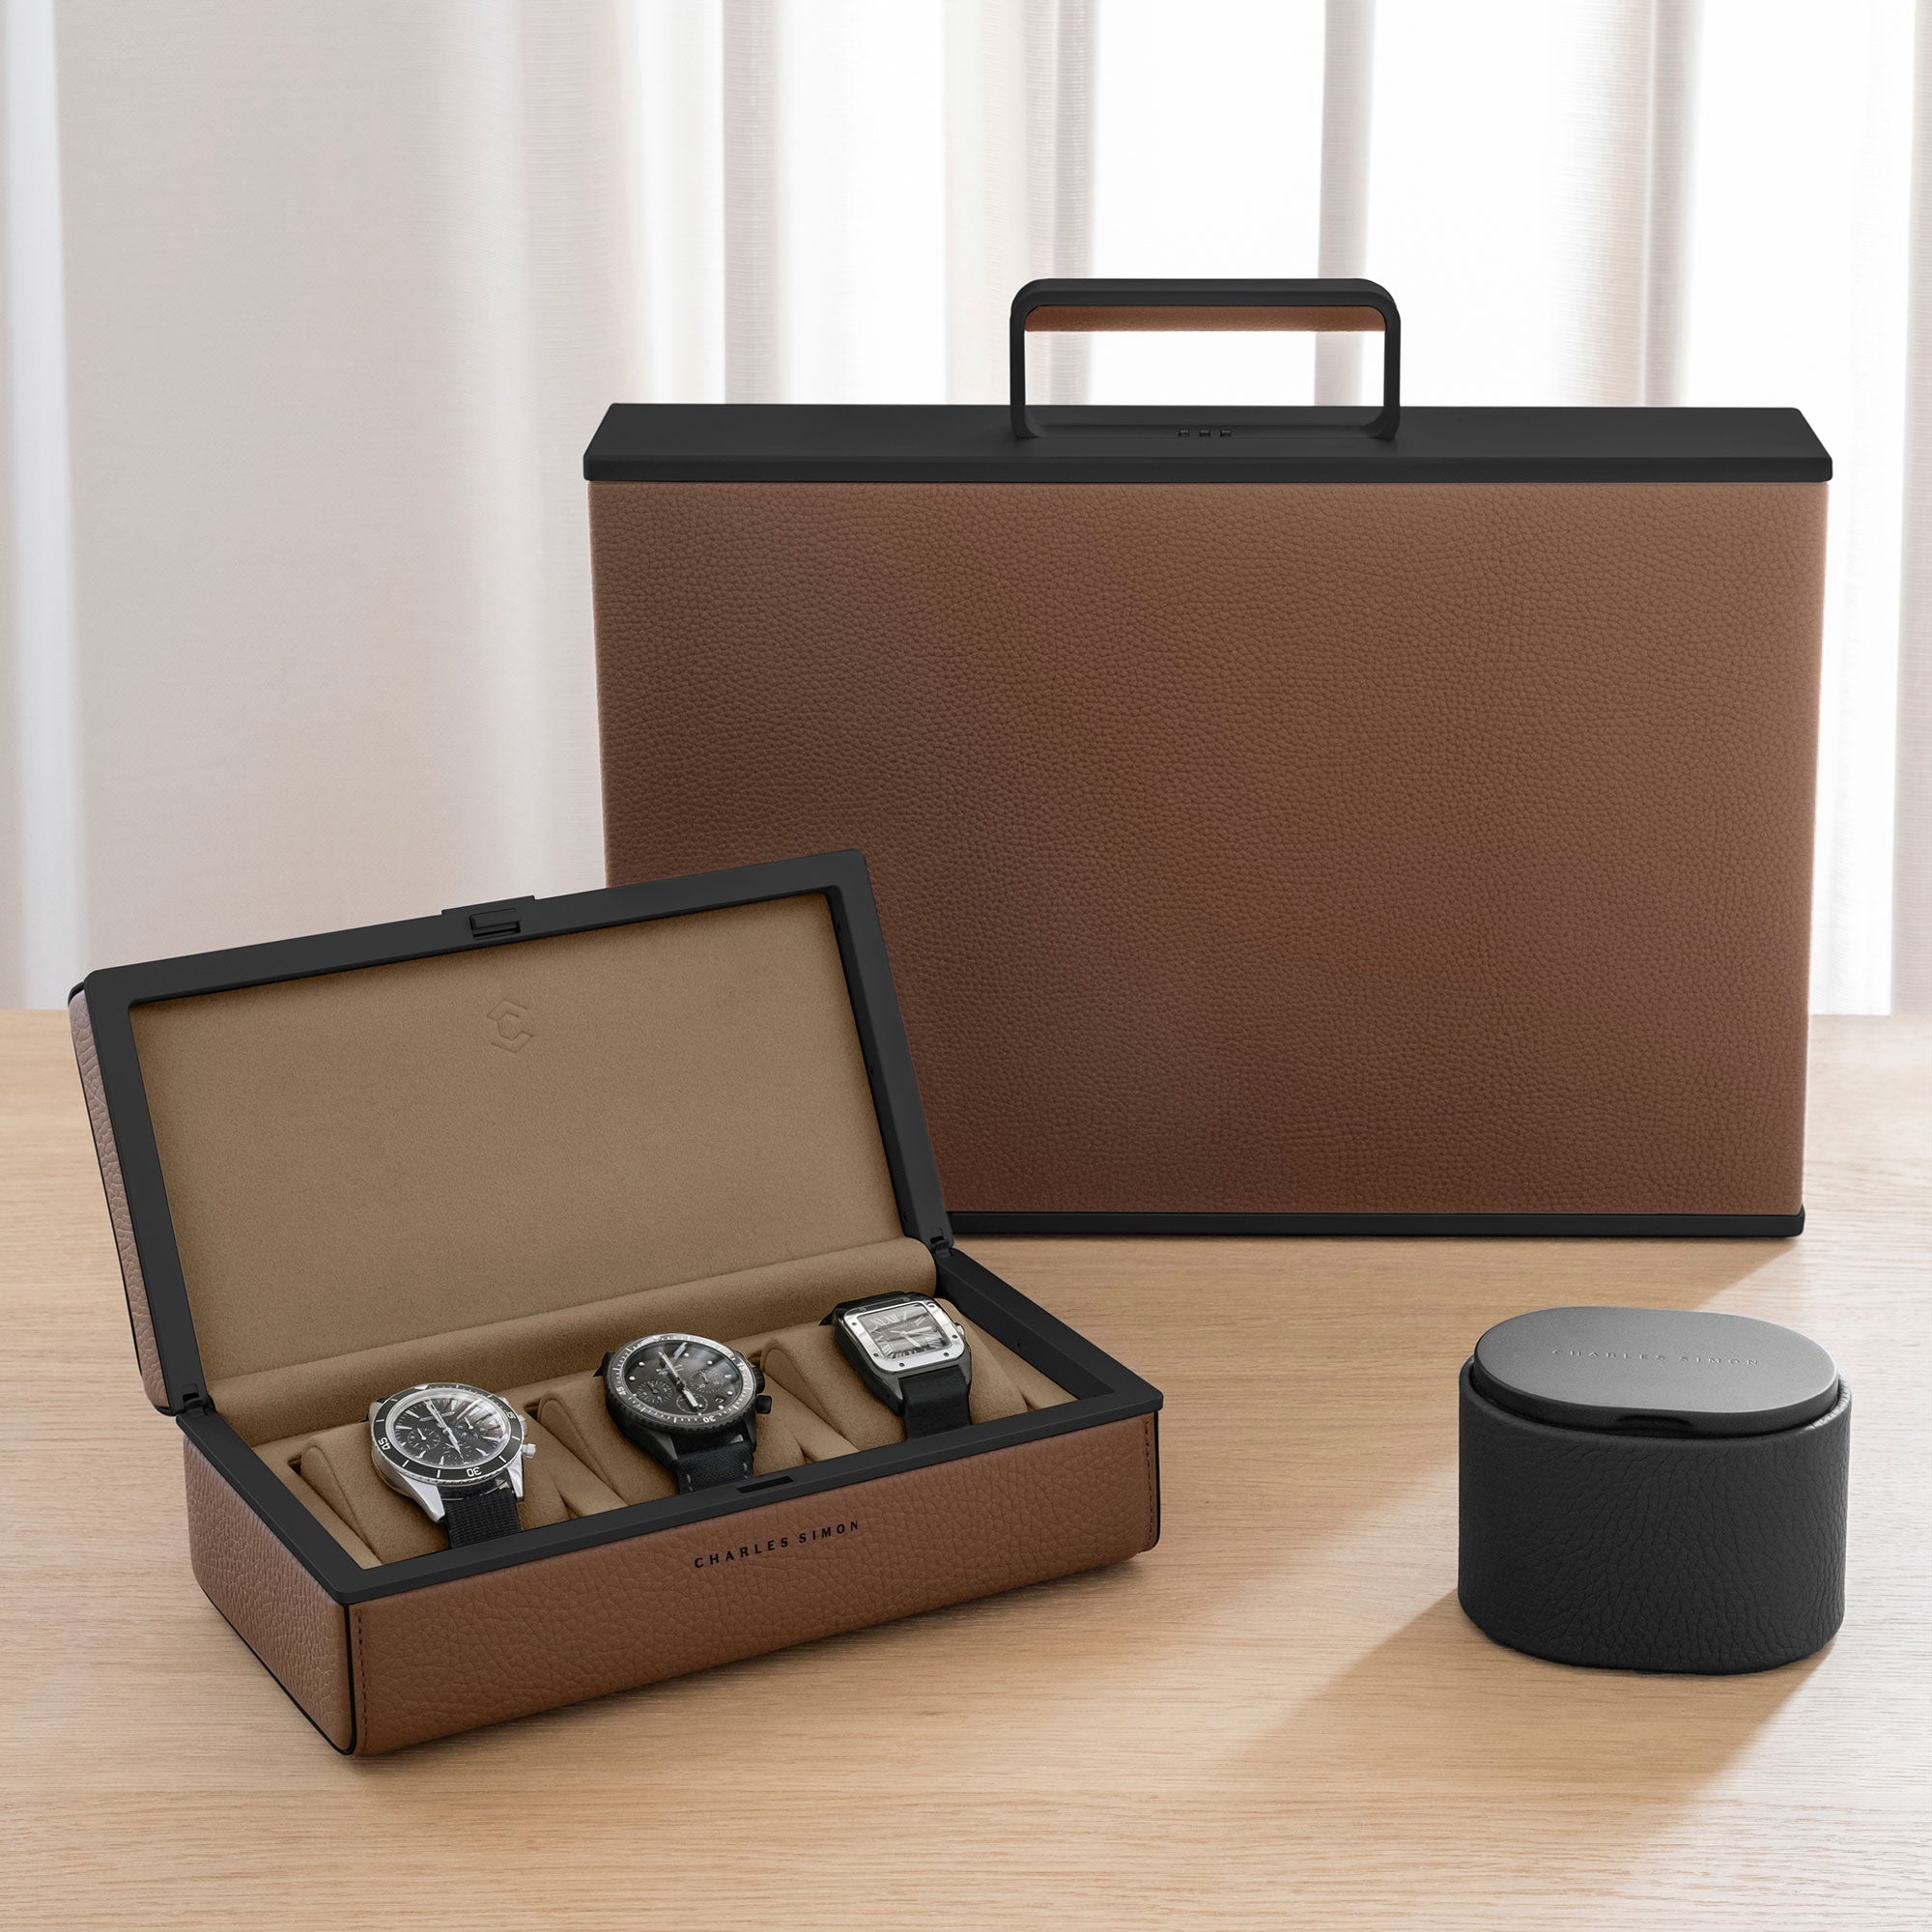 Charles Simon watch accessory collection, including Eaton 3 for 3 watches on the left, Theo watch roll on the right and Mackenzie Watch briefcase for a watch collection of up to 12 watches in tan leather, black carbon fiber and anodized aluminum and camel interior